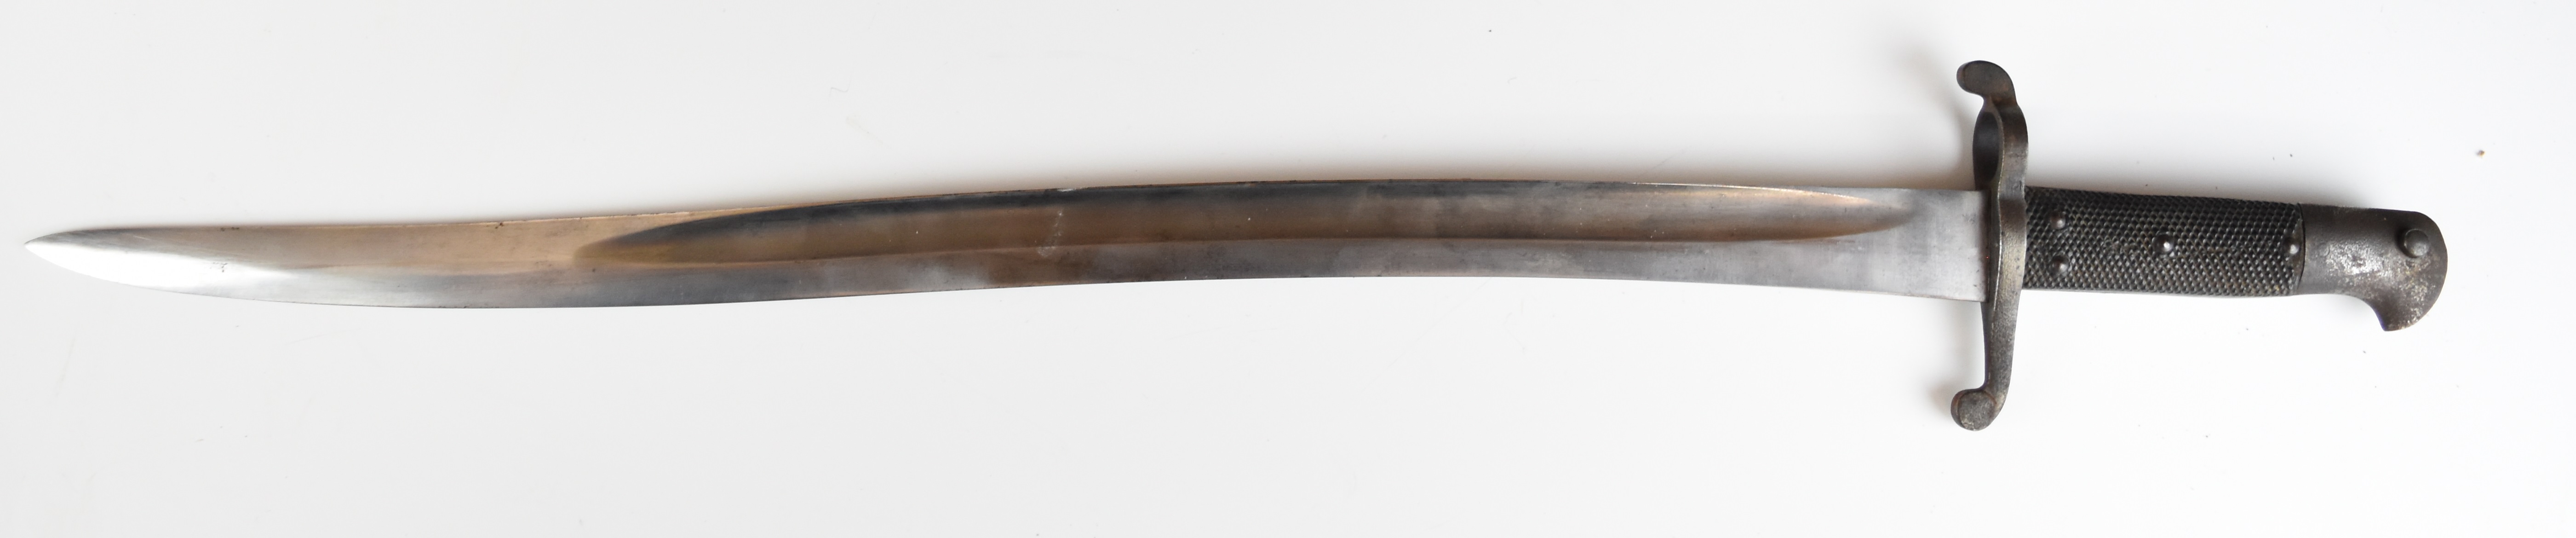 British 1863 pattern Enfield sword bayonet with leather grips, external leaf spring, some good - Image 2 of 8